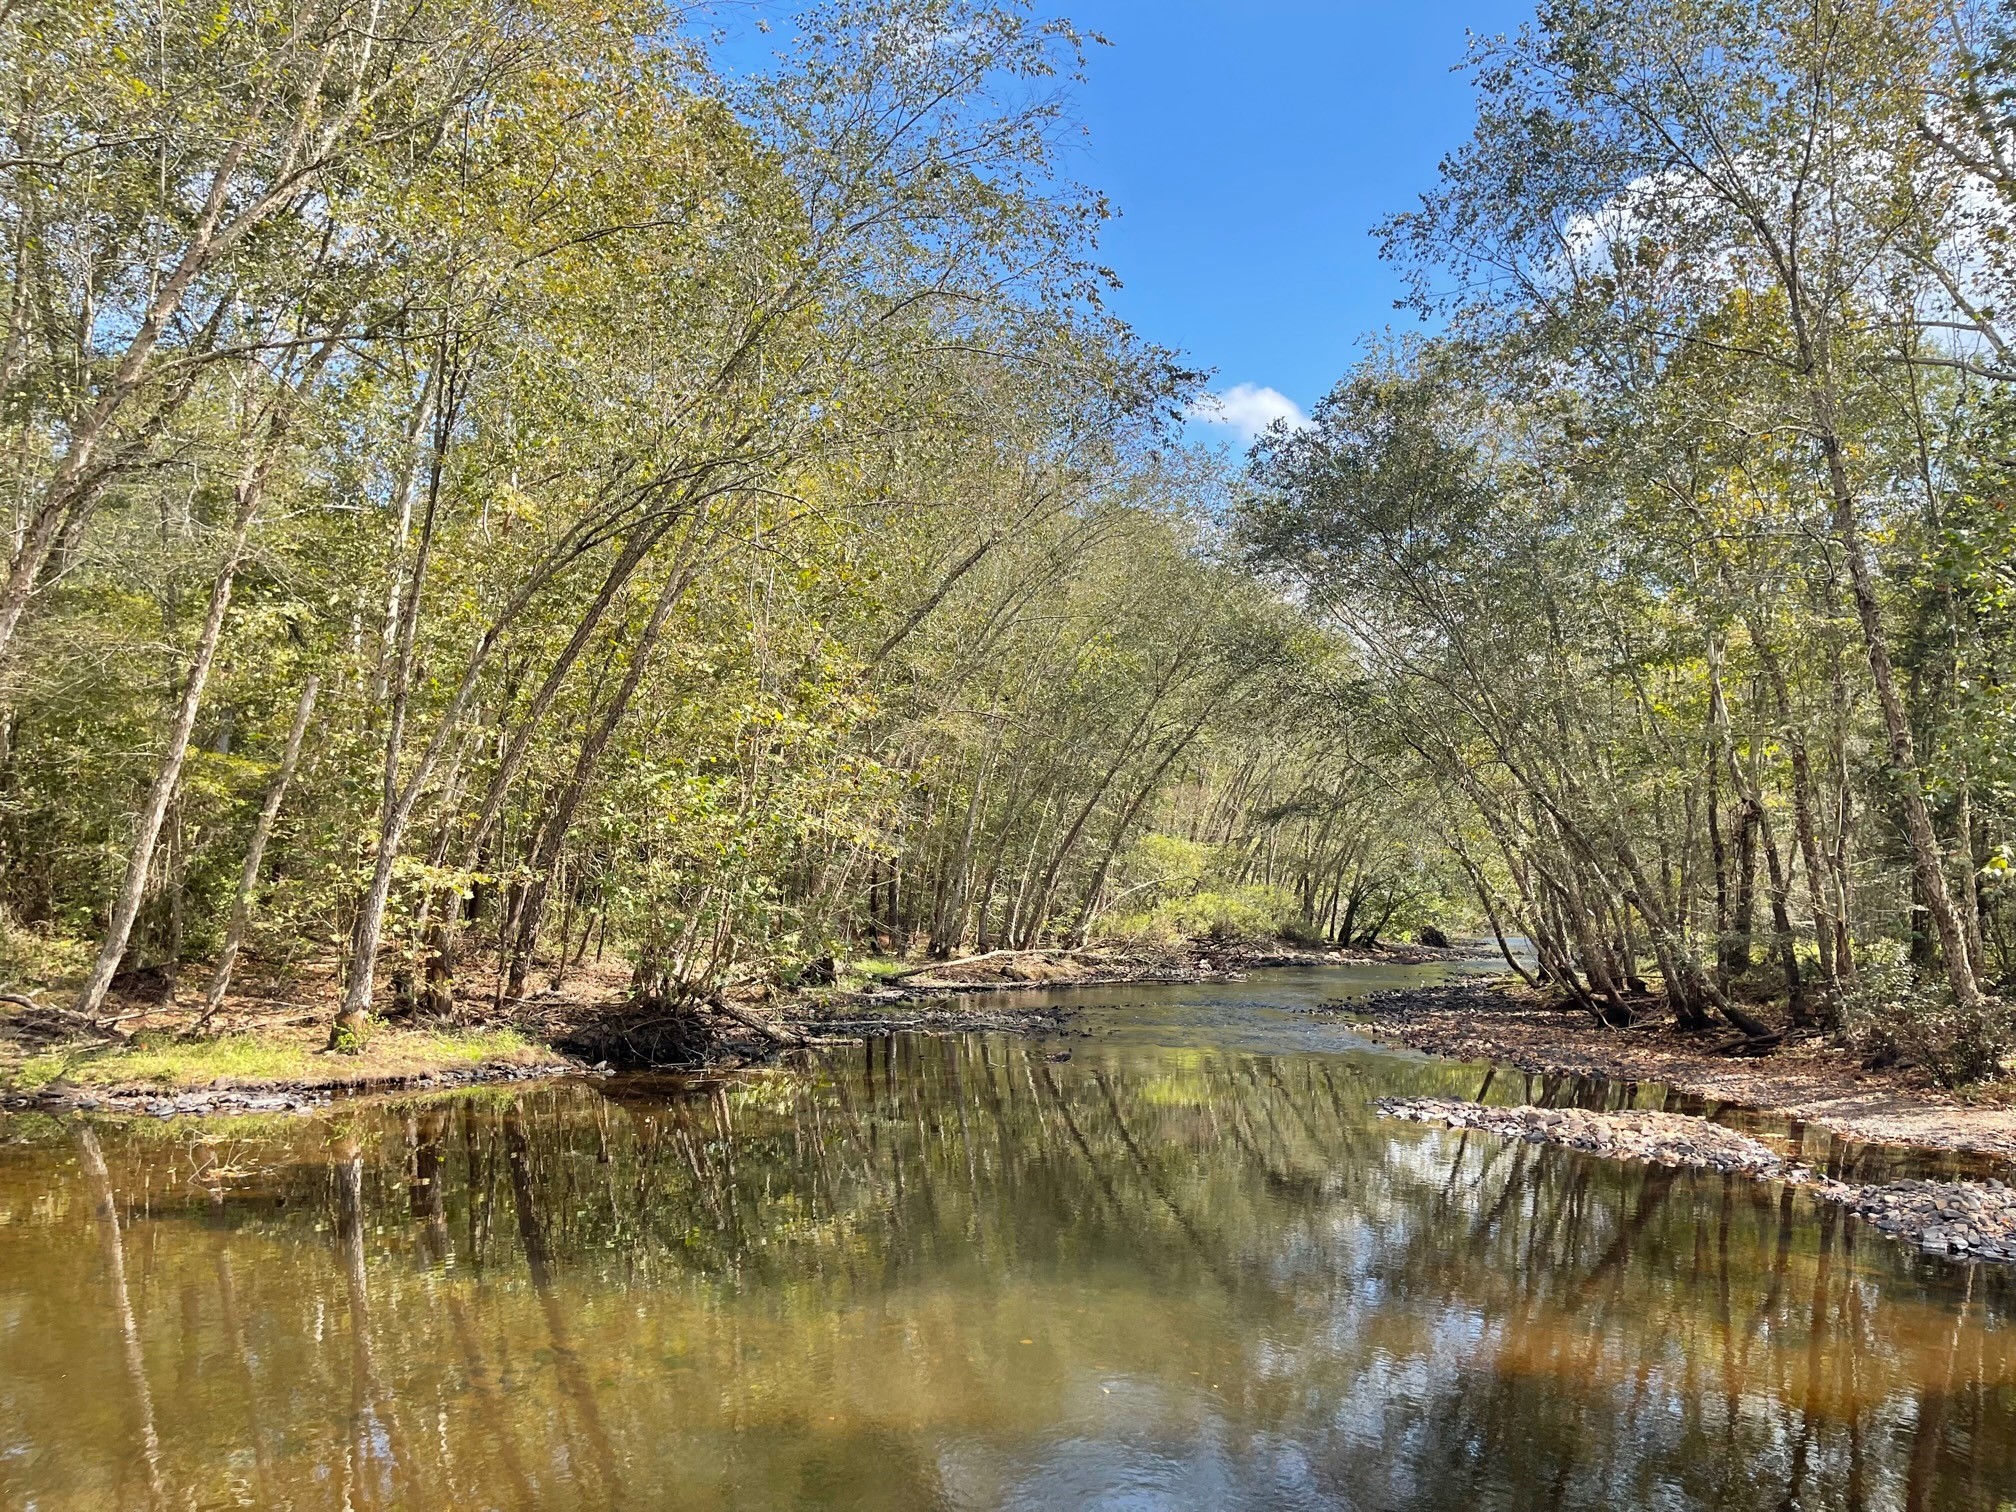 Downstream view of the Saline River in southwest Arkansas.